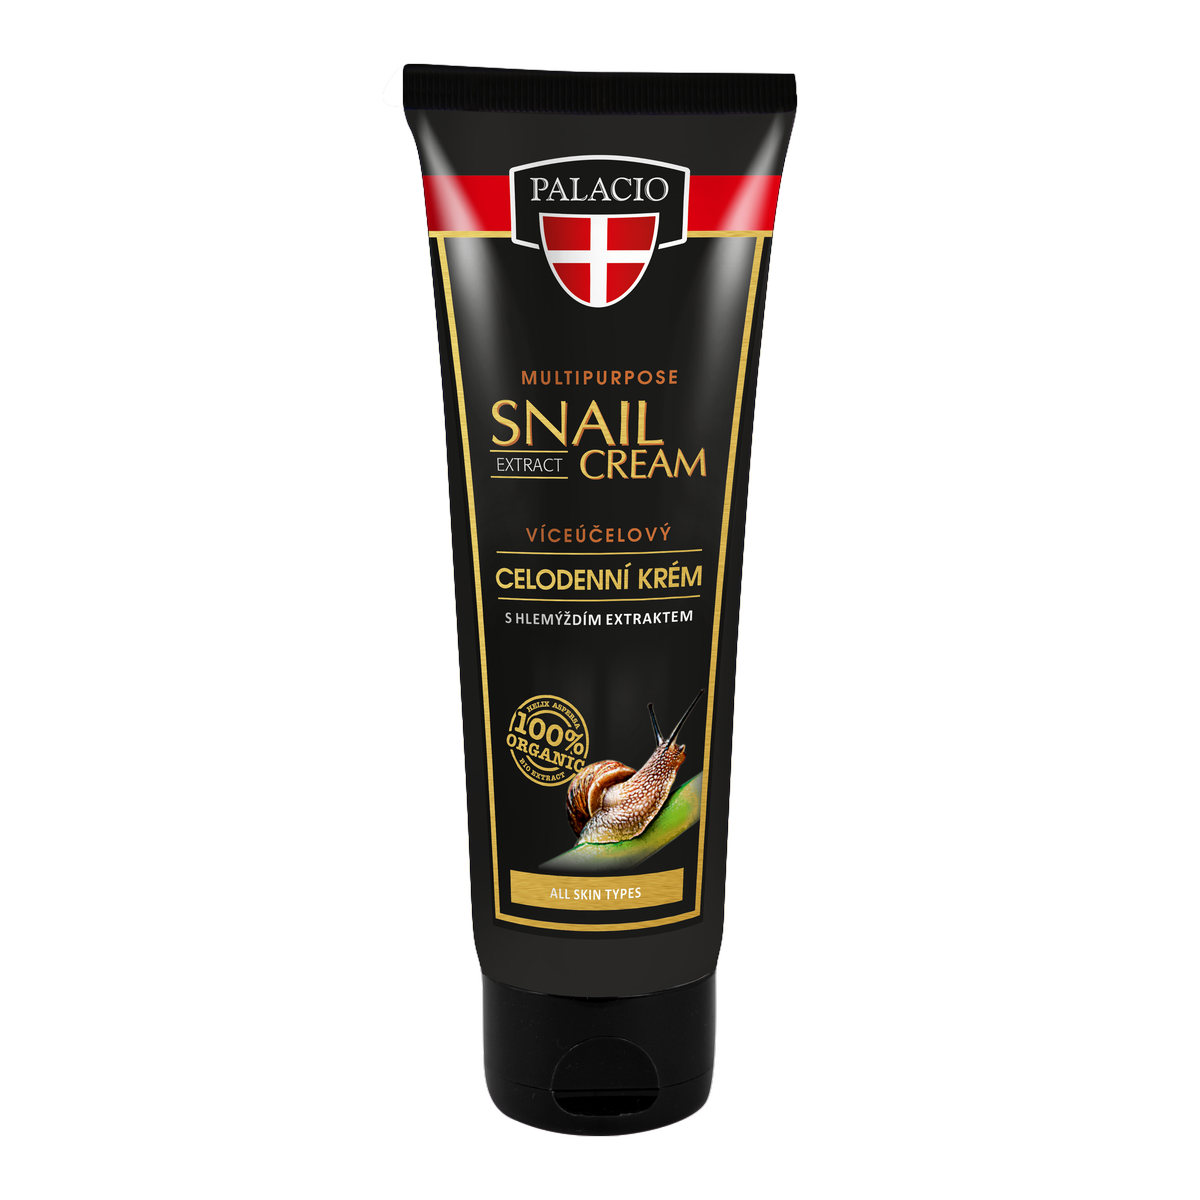 SNAIL EXTRACT Multipurpouse Cream 125ml P1305 ENG WEB 102